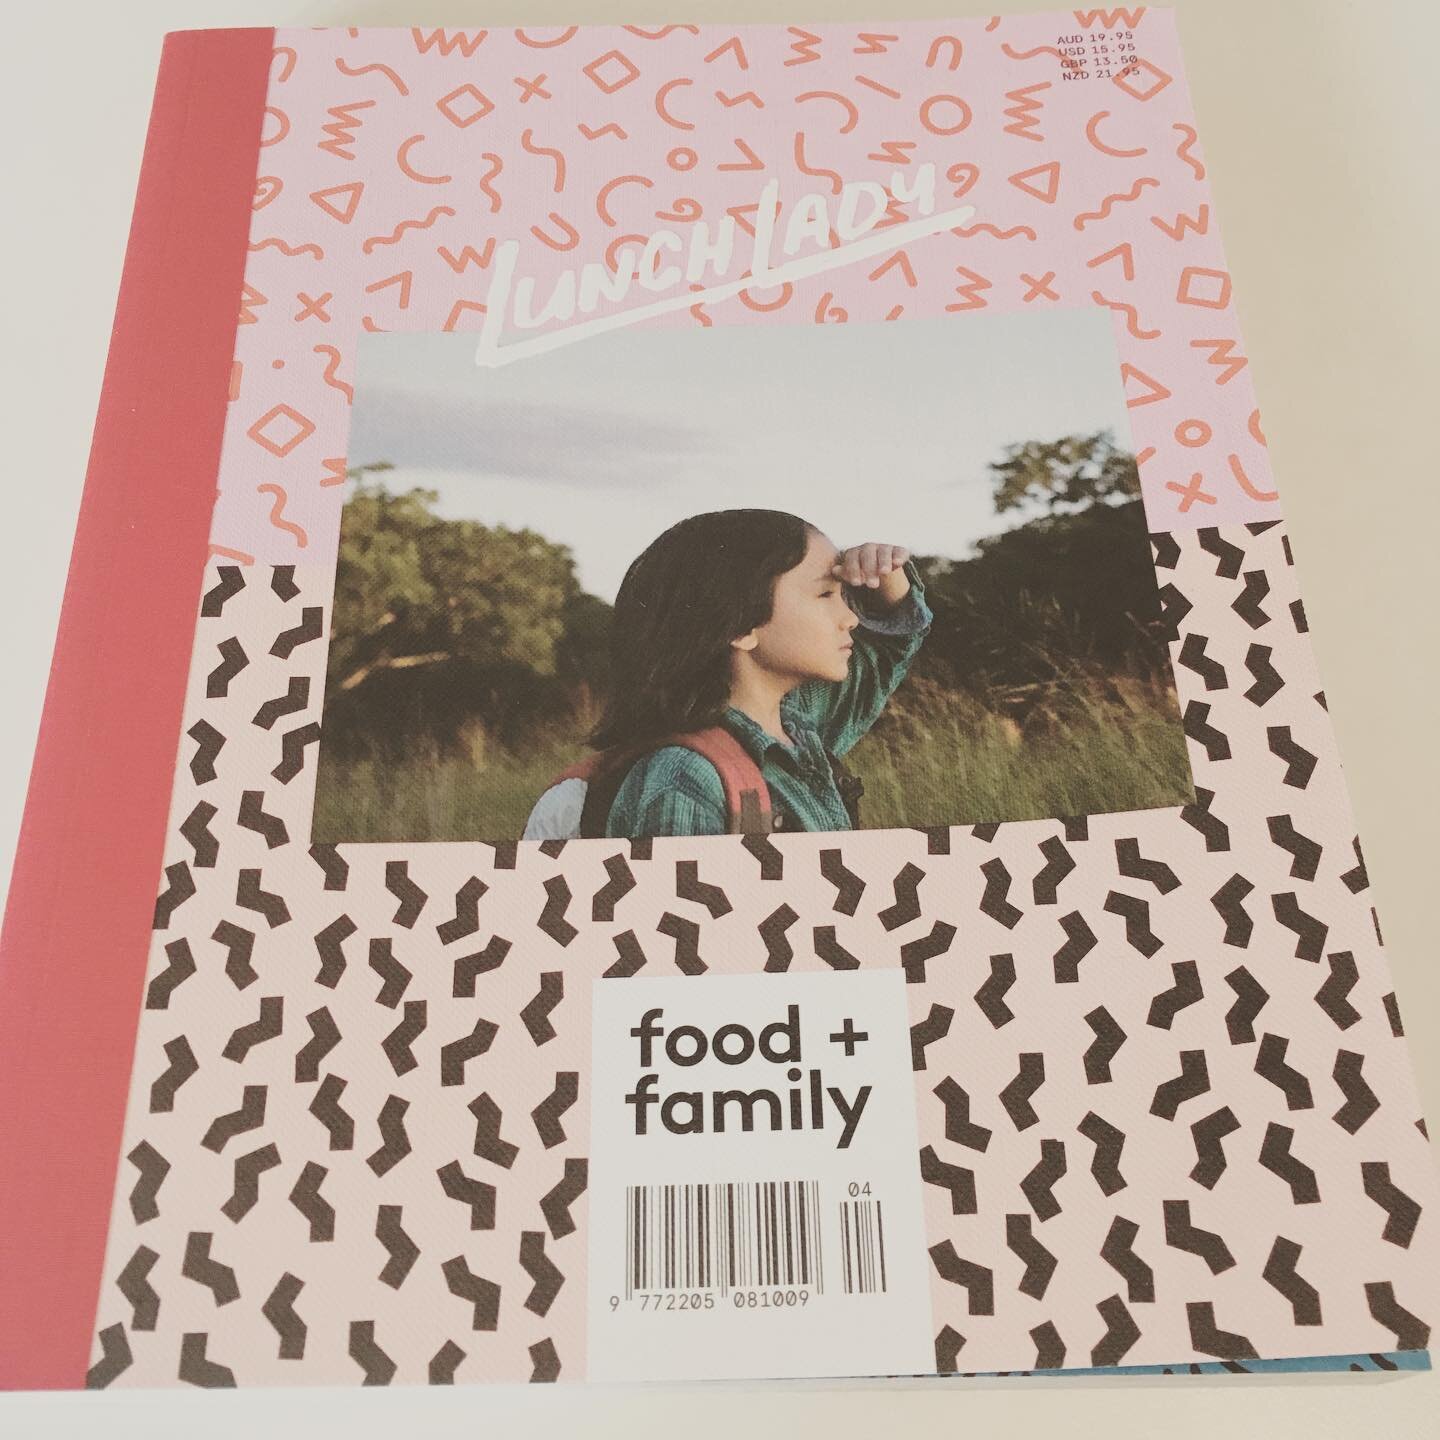 Yeah! My @hellolunchlady magazine arrived all the way from Australia! It&rsquo;s packed full of recipes, general family orientated advice and cute games and craft ideas for the kids! It helps I am obsessed with Australian brands and interiors so it&r